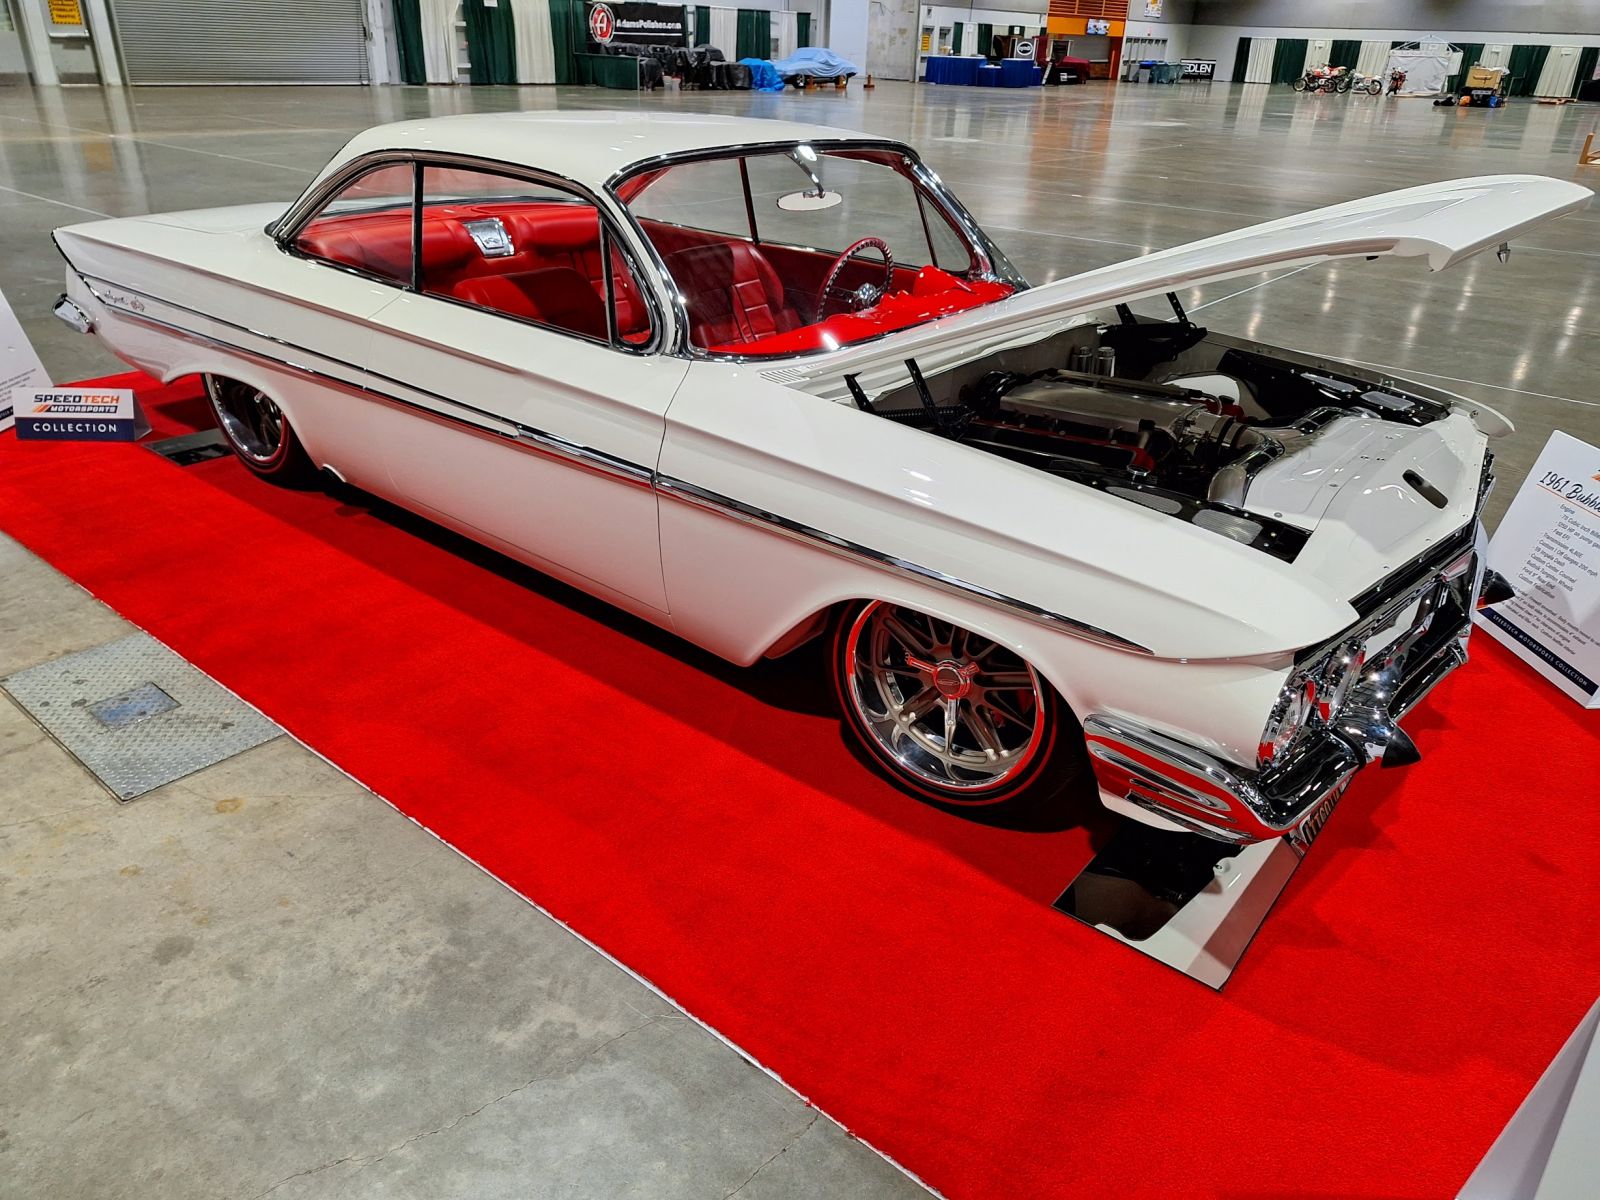 Kevin Moore’s a 1961 Chevy Impala with 750hp LS comes to Spokane from California